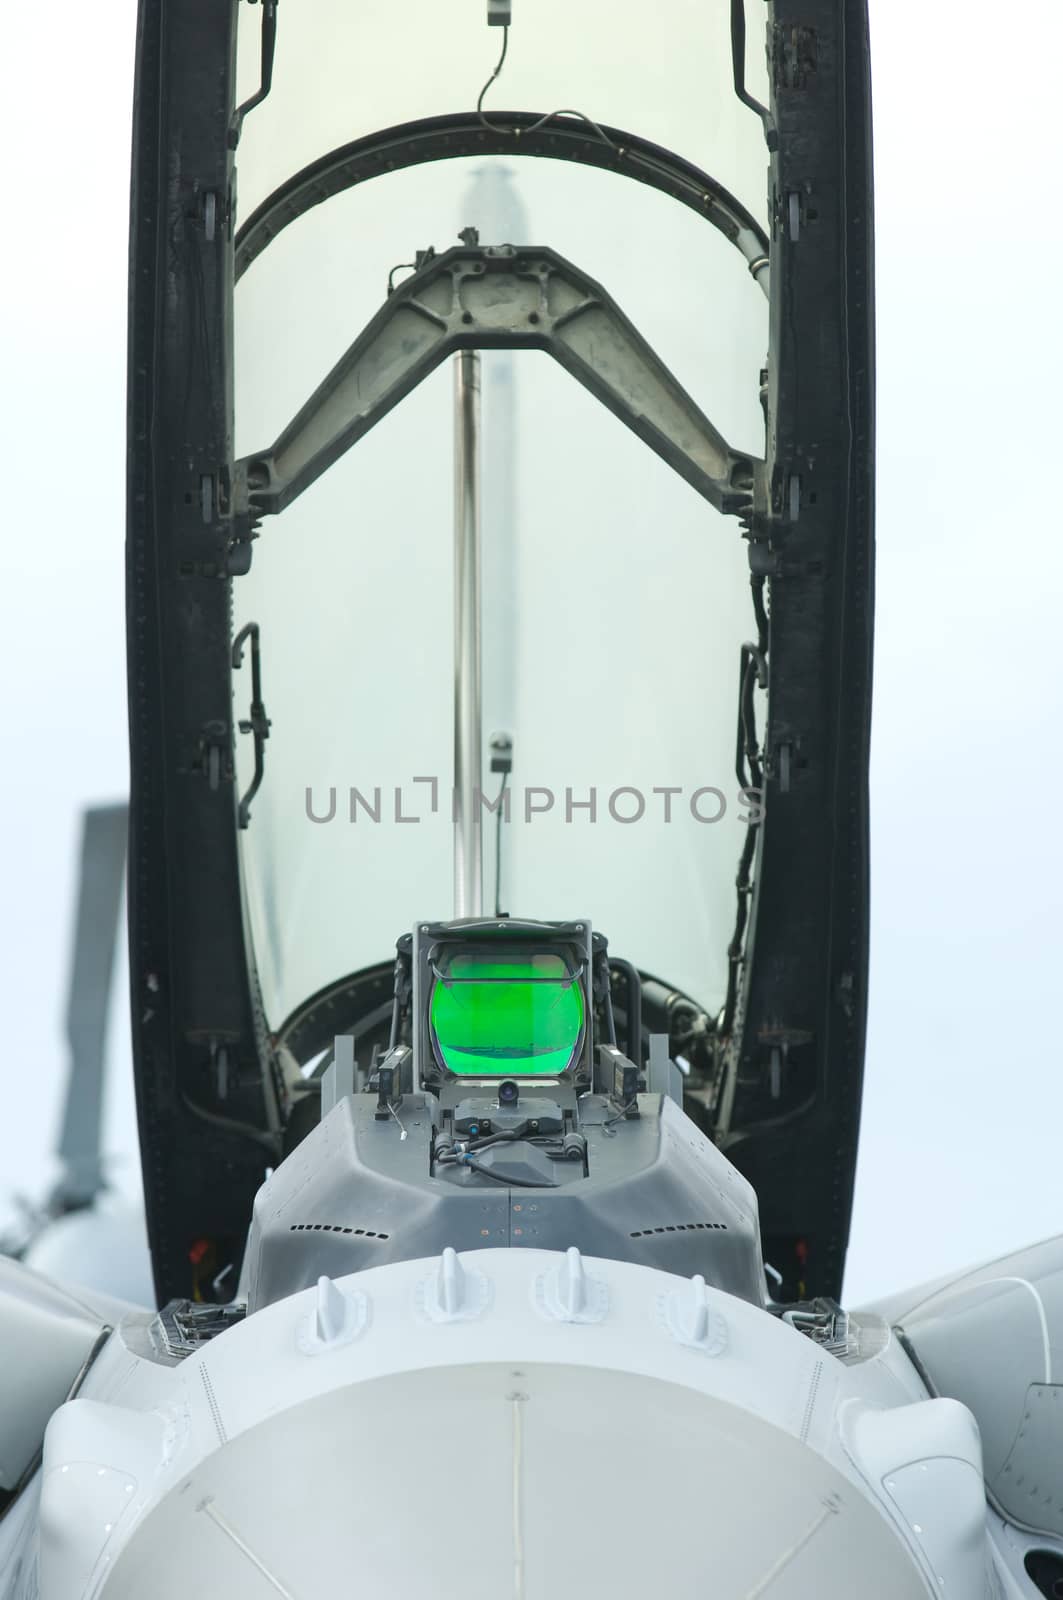 Front view of the open cockpit of a fighter jet with green head-up display.